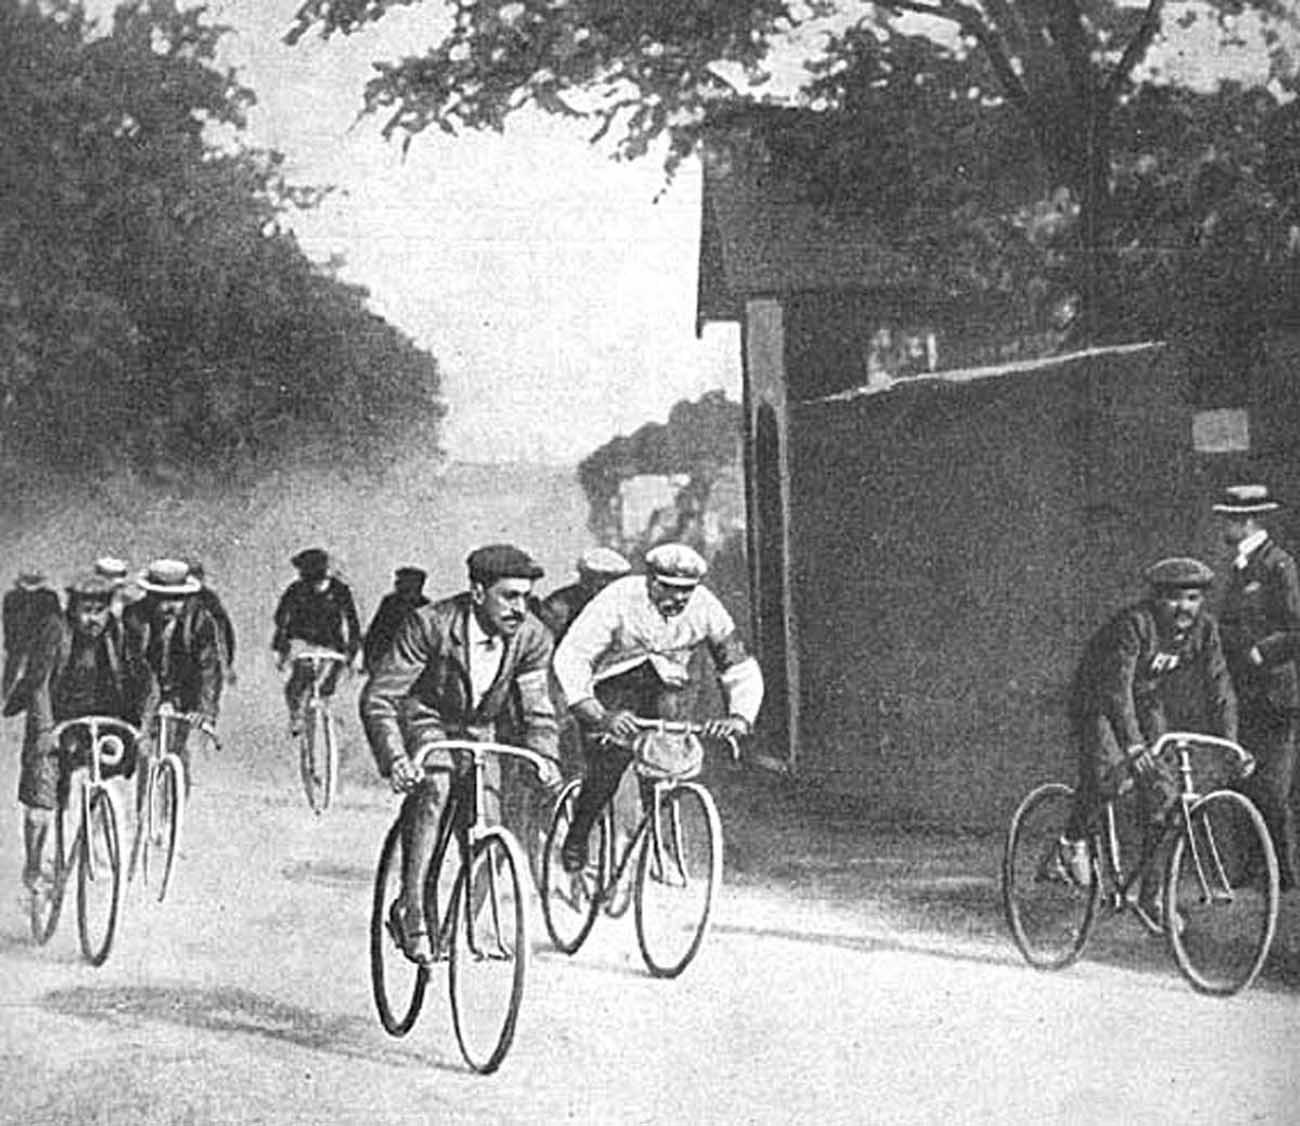 Maurice Garin, in his trademark white coat and flat cap racing in the 1903 Tour.